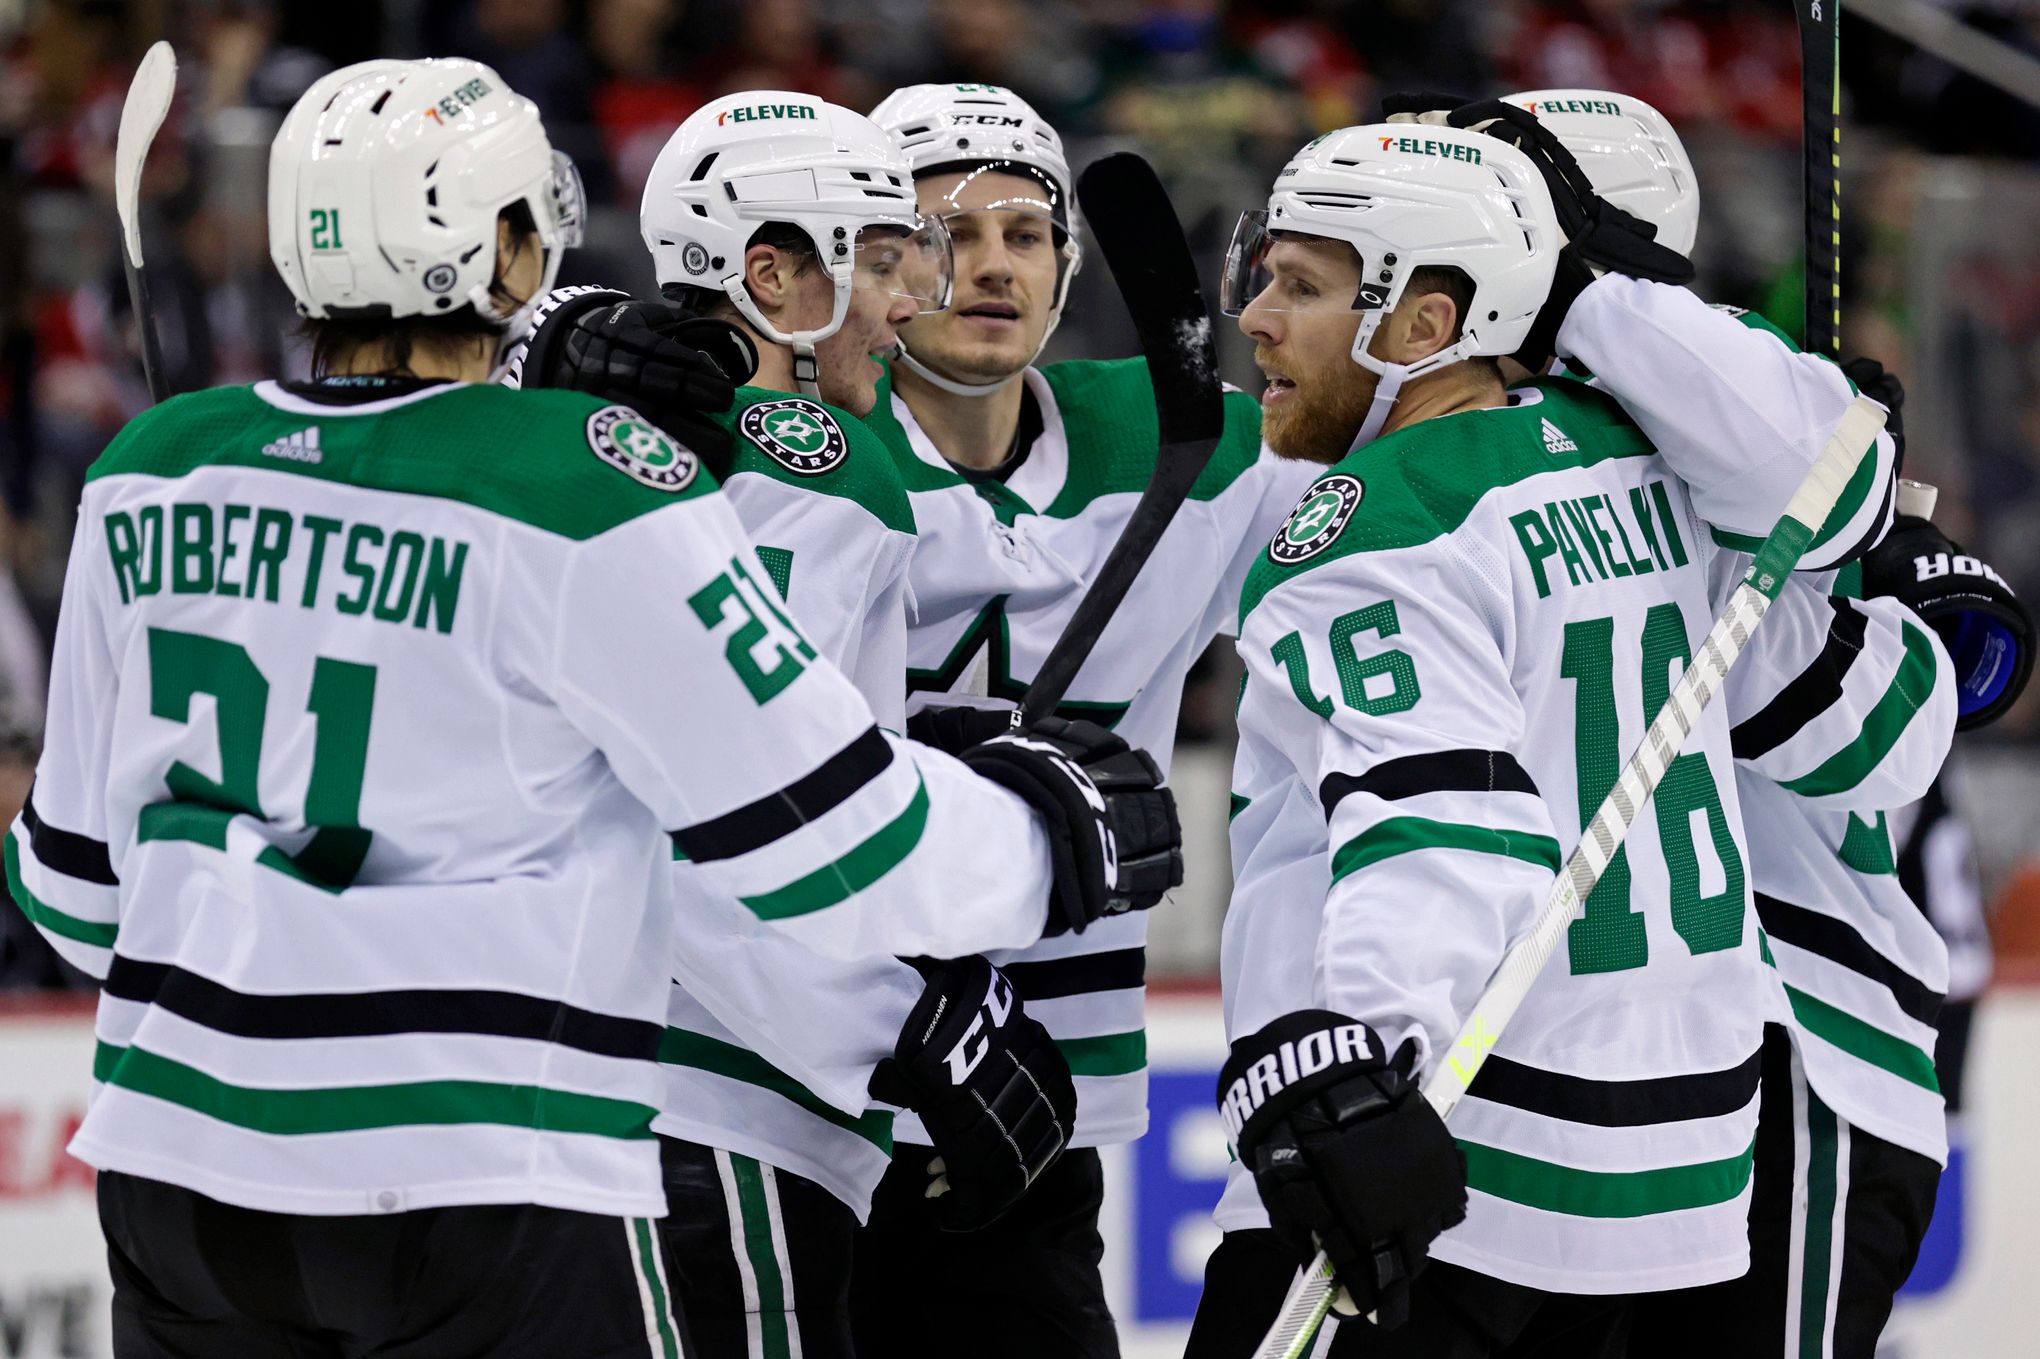 Stars win fifth straight to take Central Division lead with